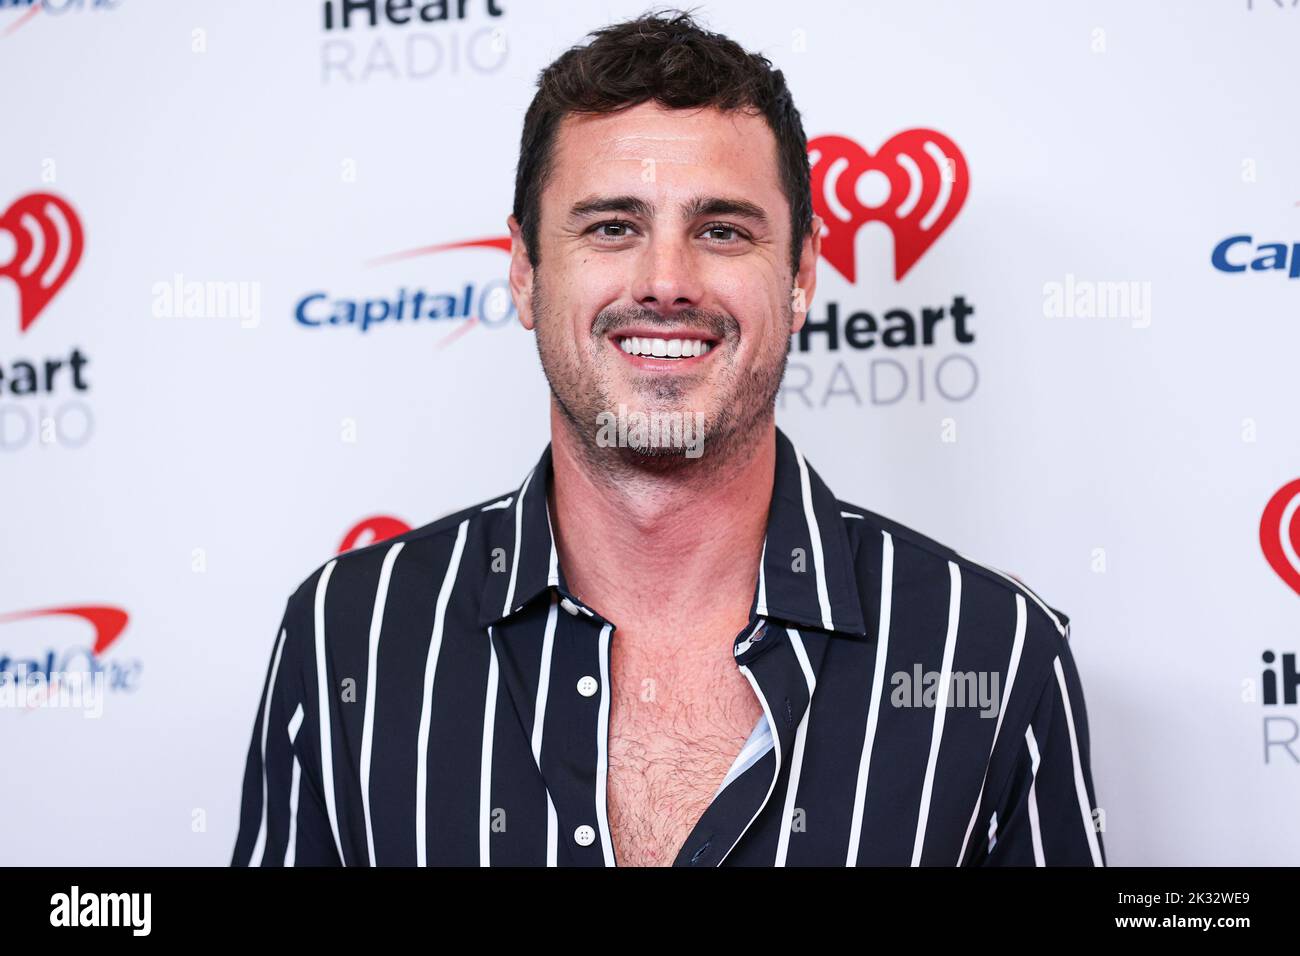 LAS VEGAS, NEVADA, USA - SEPTEMBER 23: Ben Higgins poses in the press room at the 2022 iHeartRadio Music Festival - Night 1 held at the T-Mobile Arena on September 23, 2022 in Las Vegas, Nevada, United States. (Photo by Xavier Collin/Image Press Agency) Stock Photo